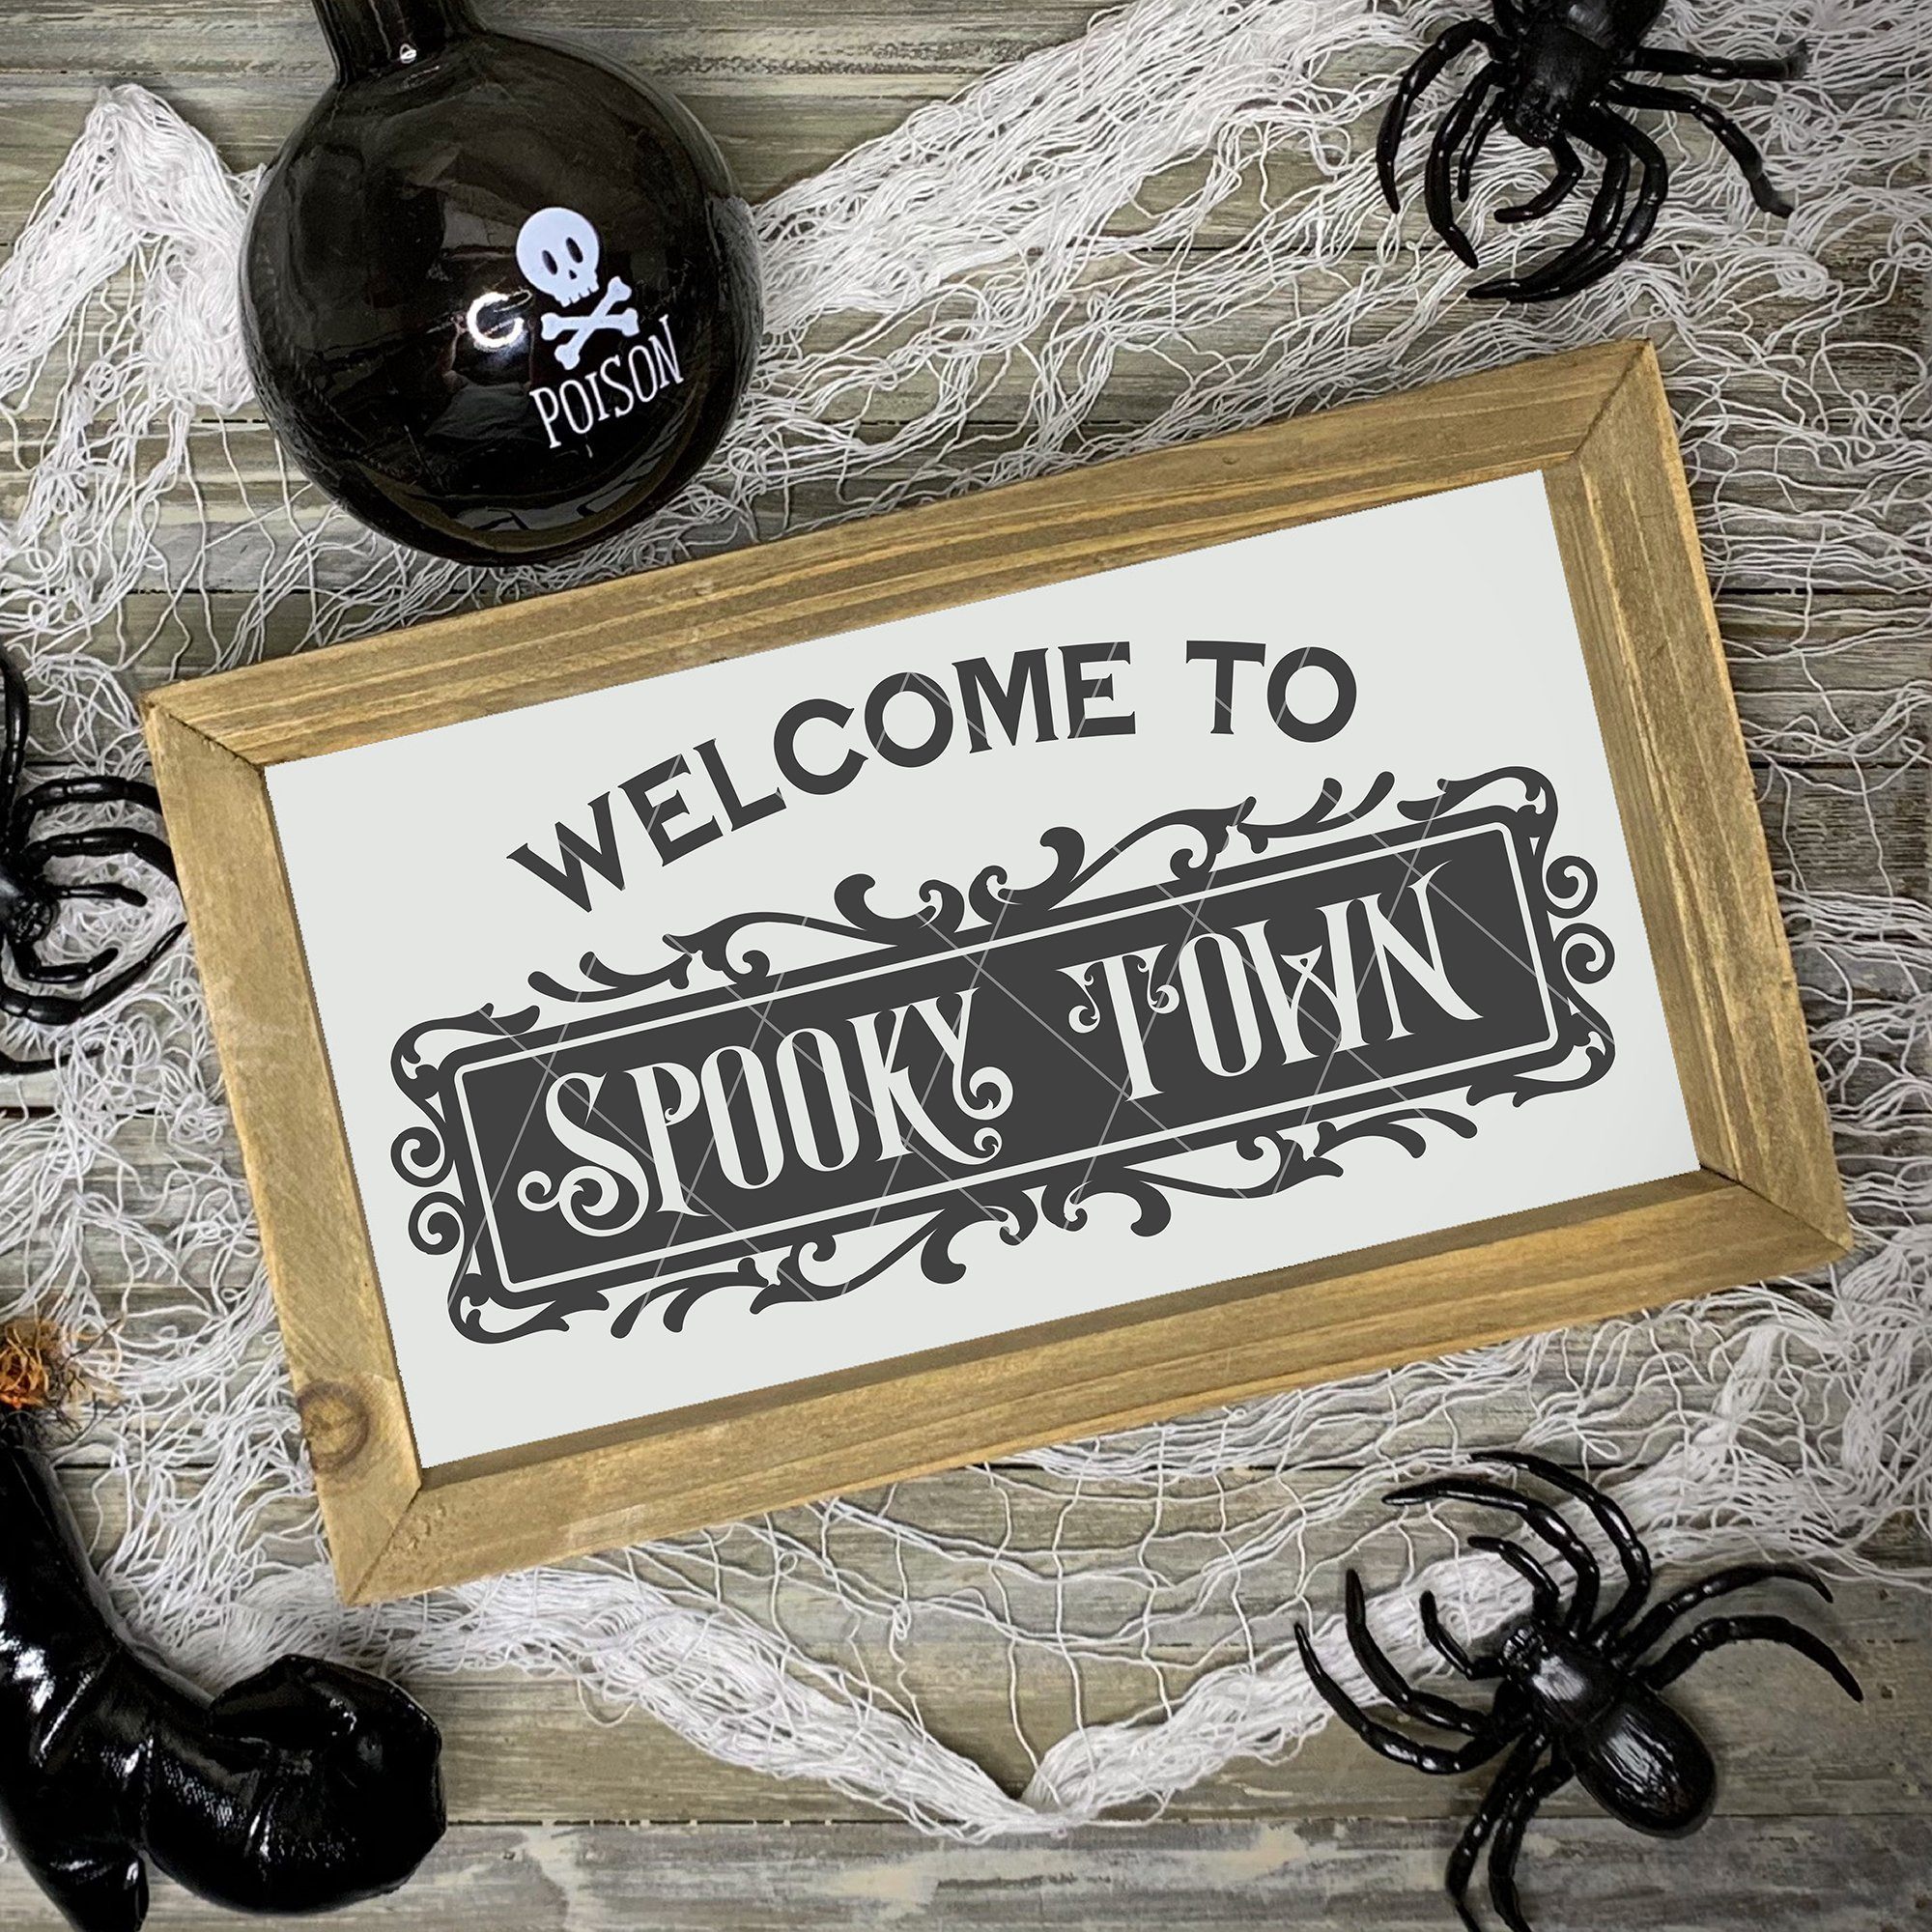 Halloween SVG File - Welcome To Spooky Town Cut File - Commercial Use SVG Files for Cricut & Silhouette